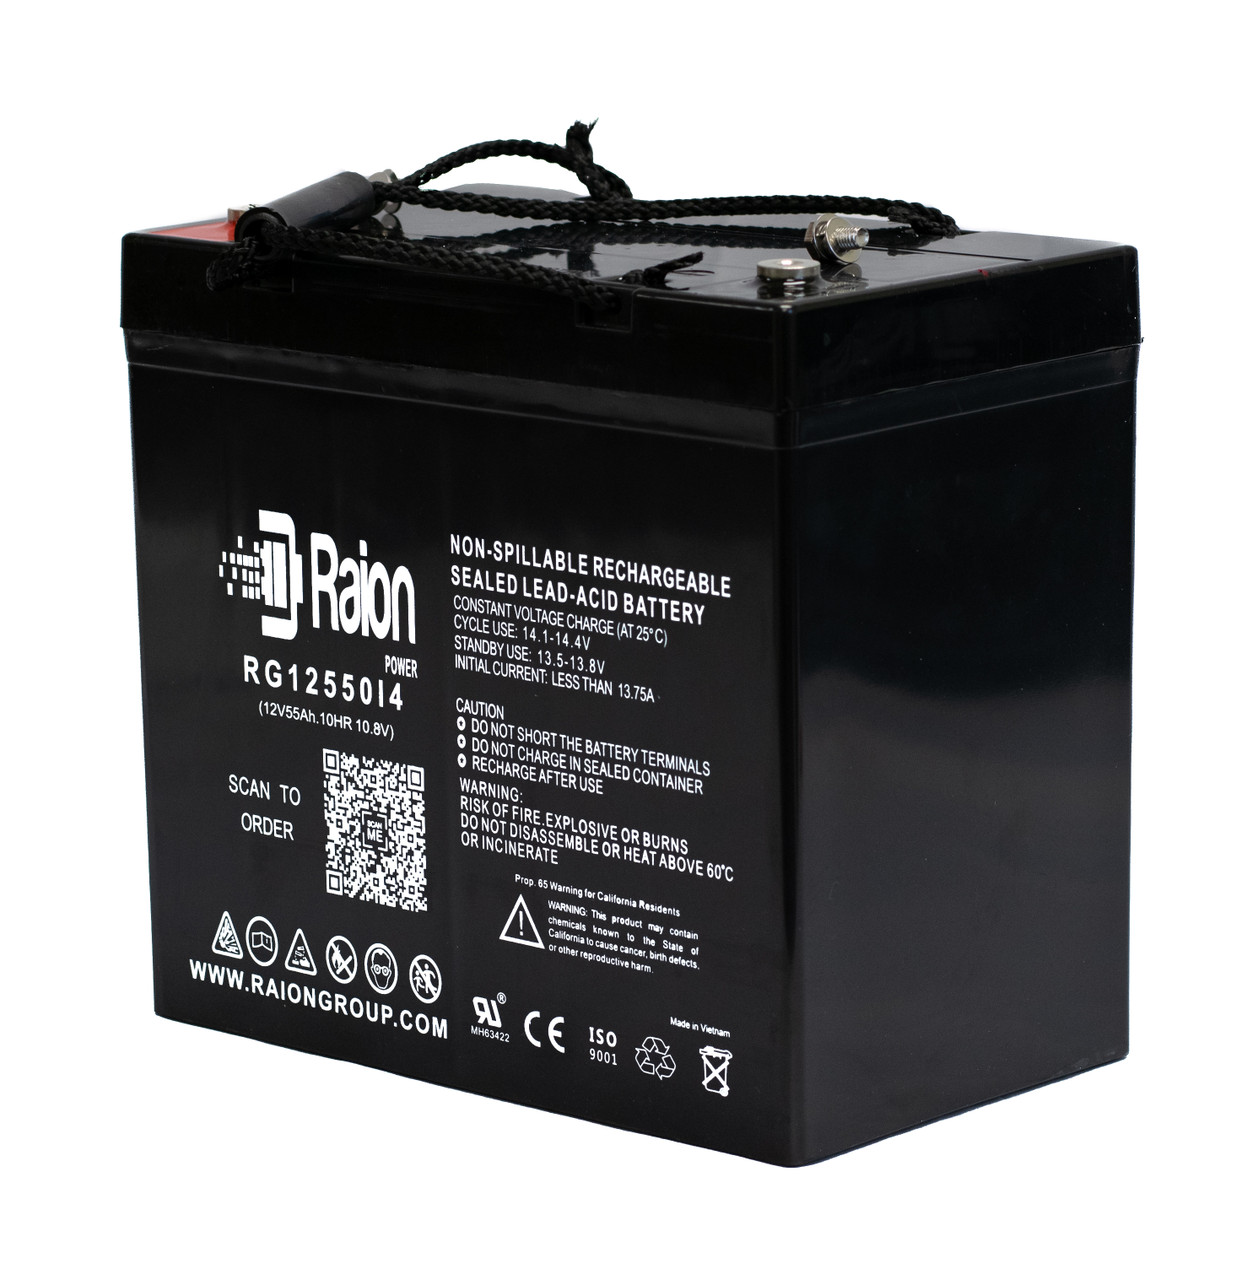 Raion Power 12V 55Ah 22NF Mobility Scooter Battery Replacement for Bruno PaceSaver Scout